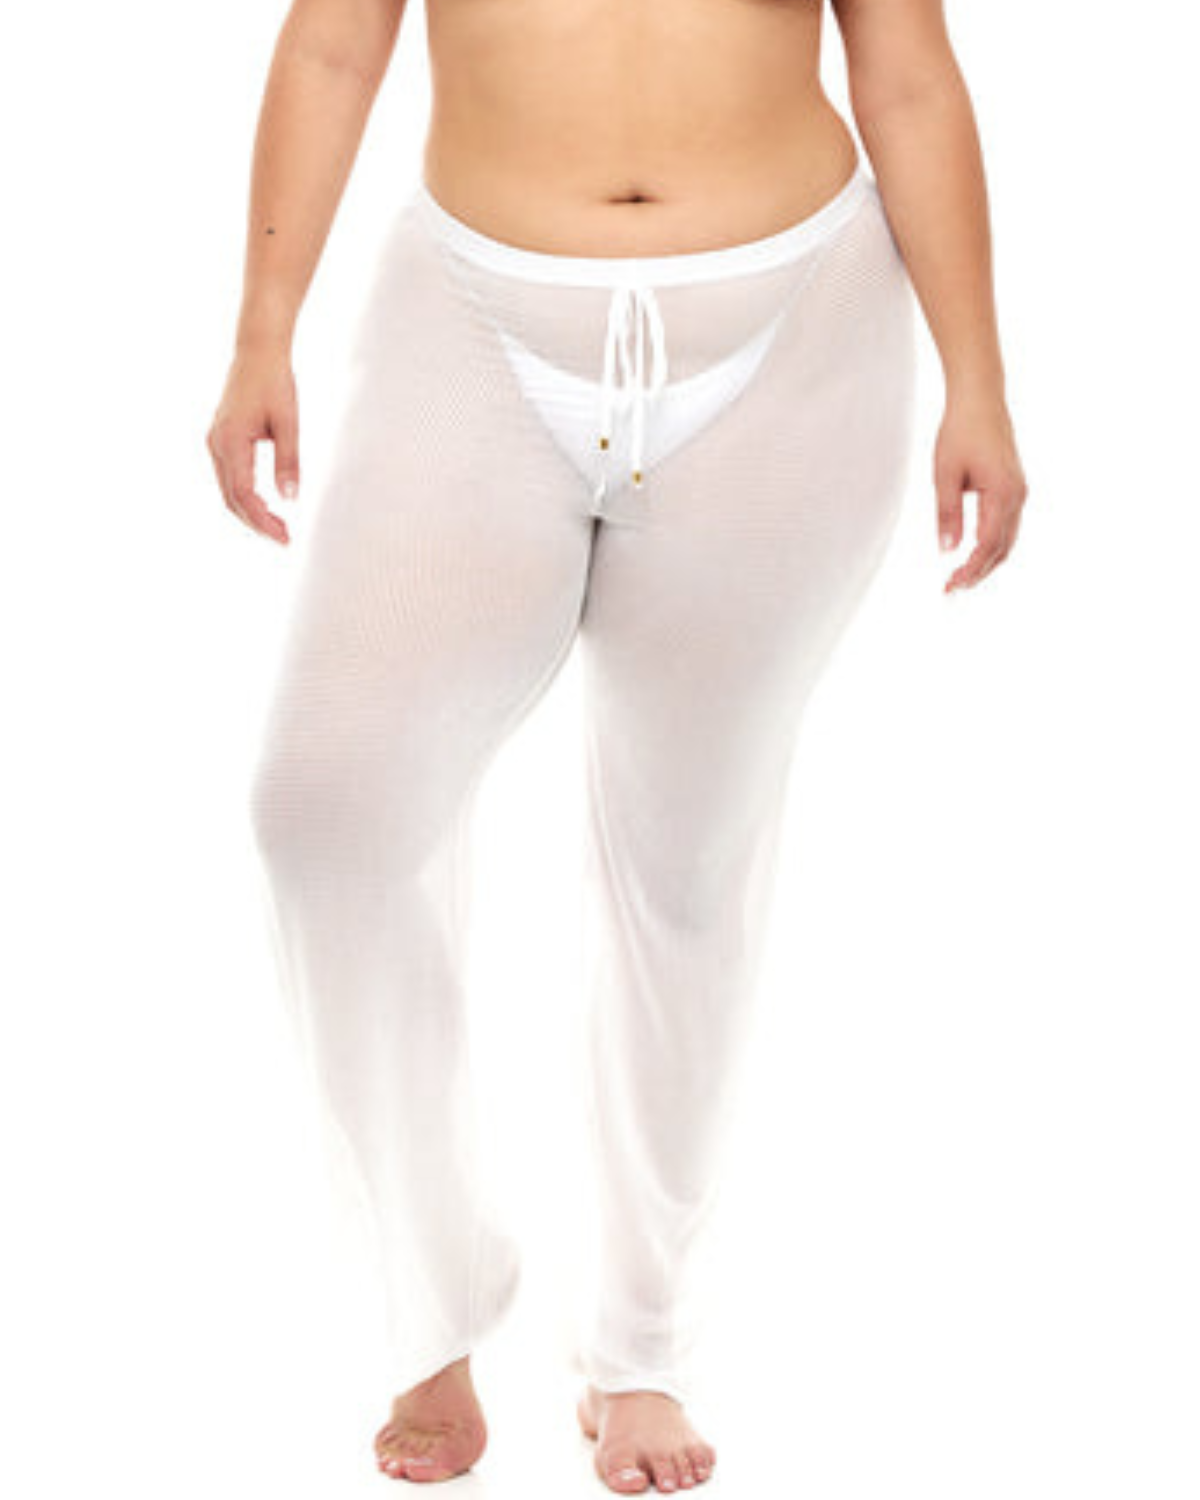 Model wearing a cover up pant in white